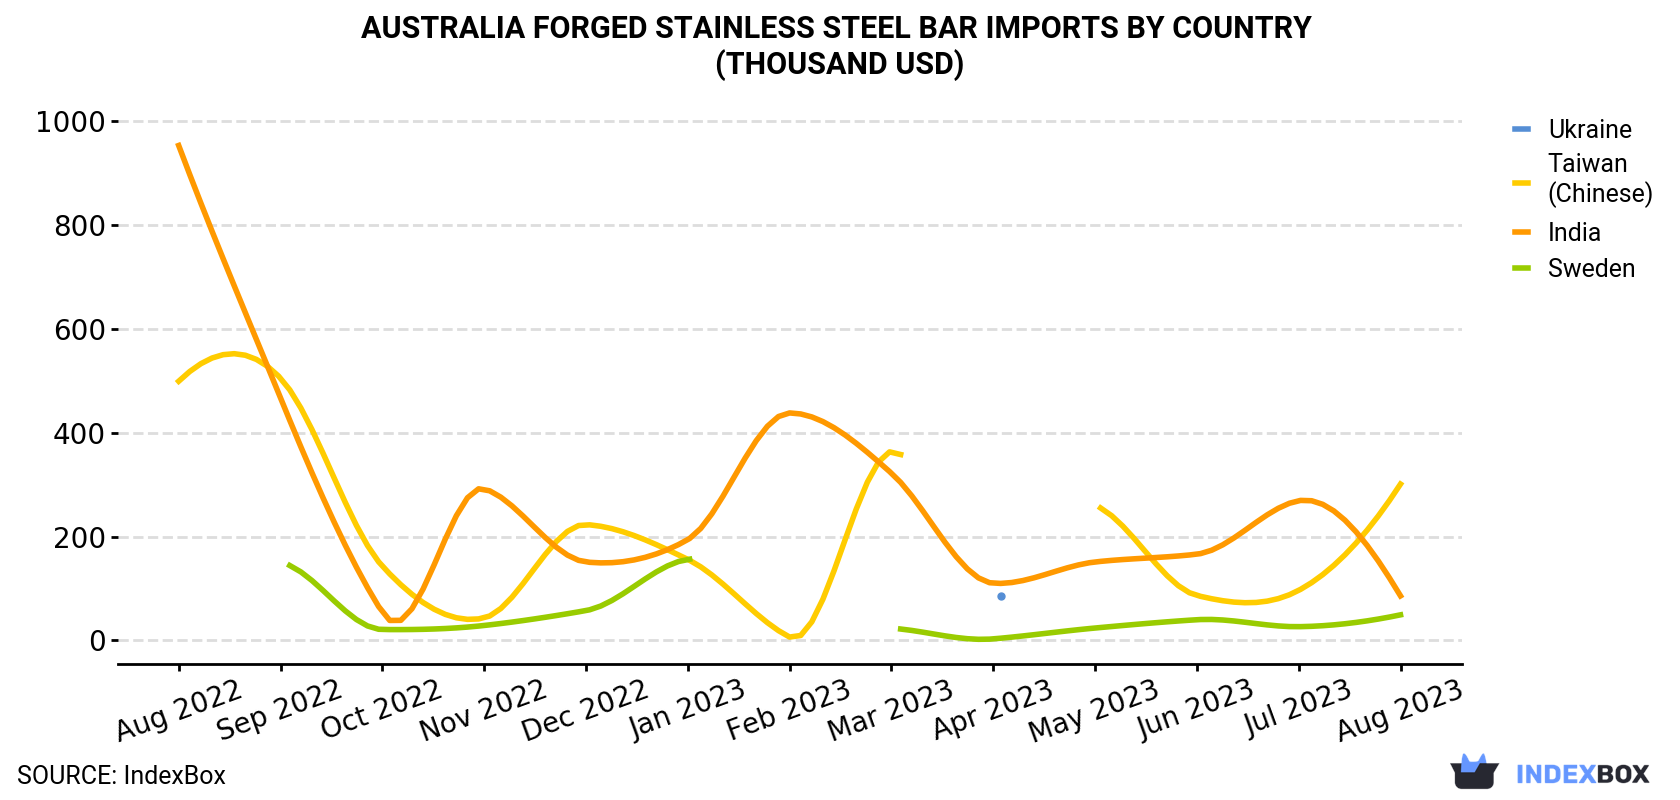 Australia Forged Stainless Steel Bar Imports By Country (Thousand USD)